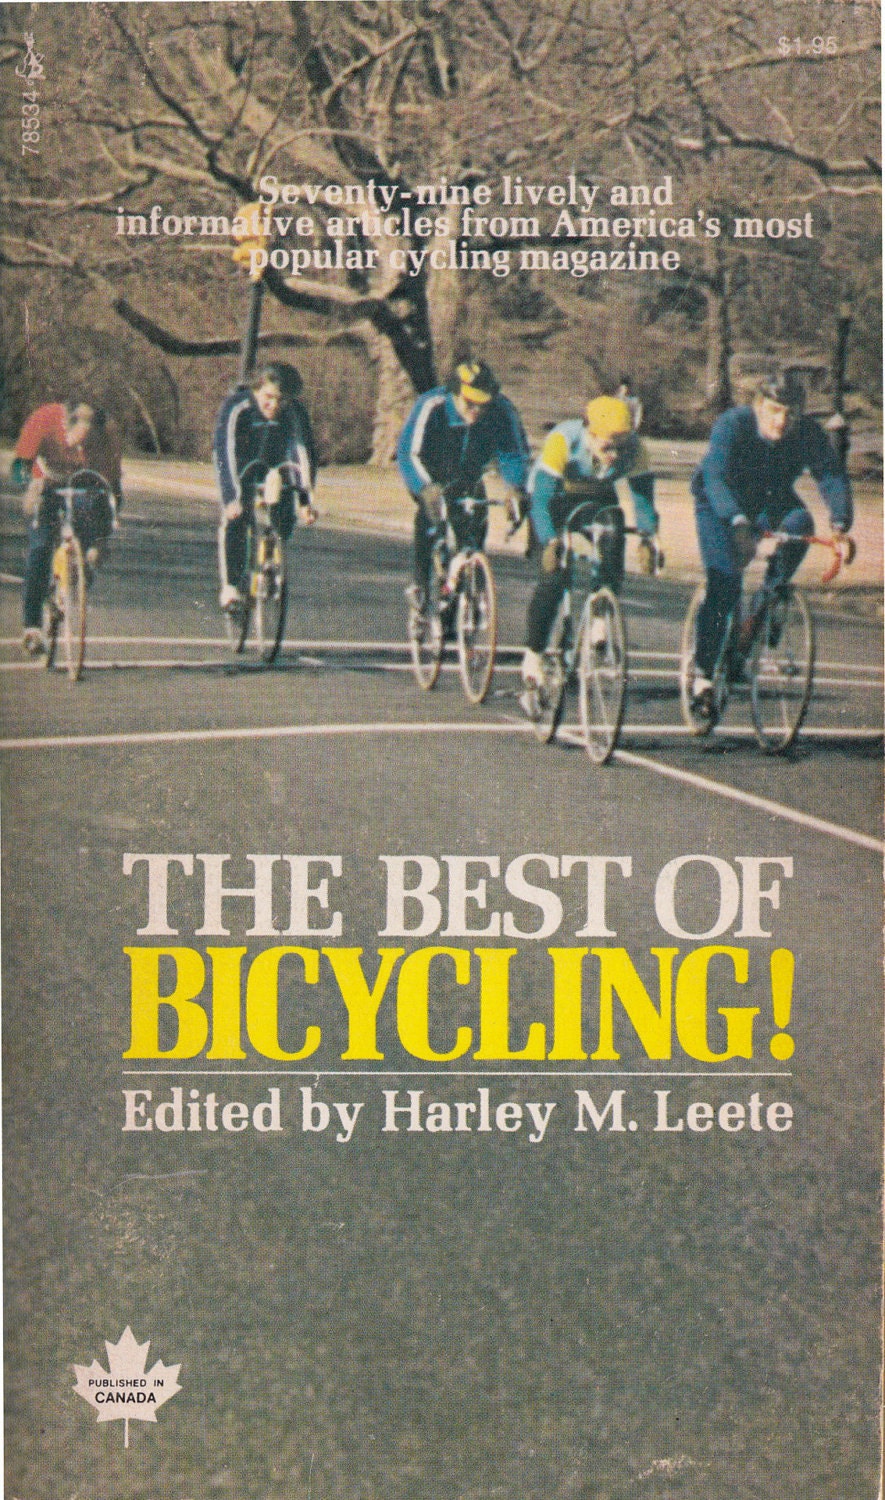 The Best of Bicycling! Harley M. Leete